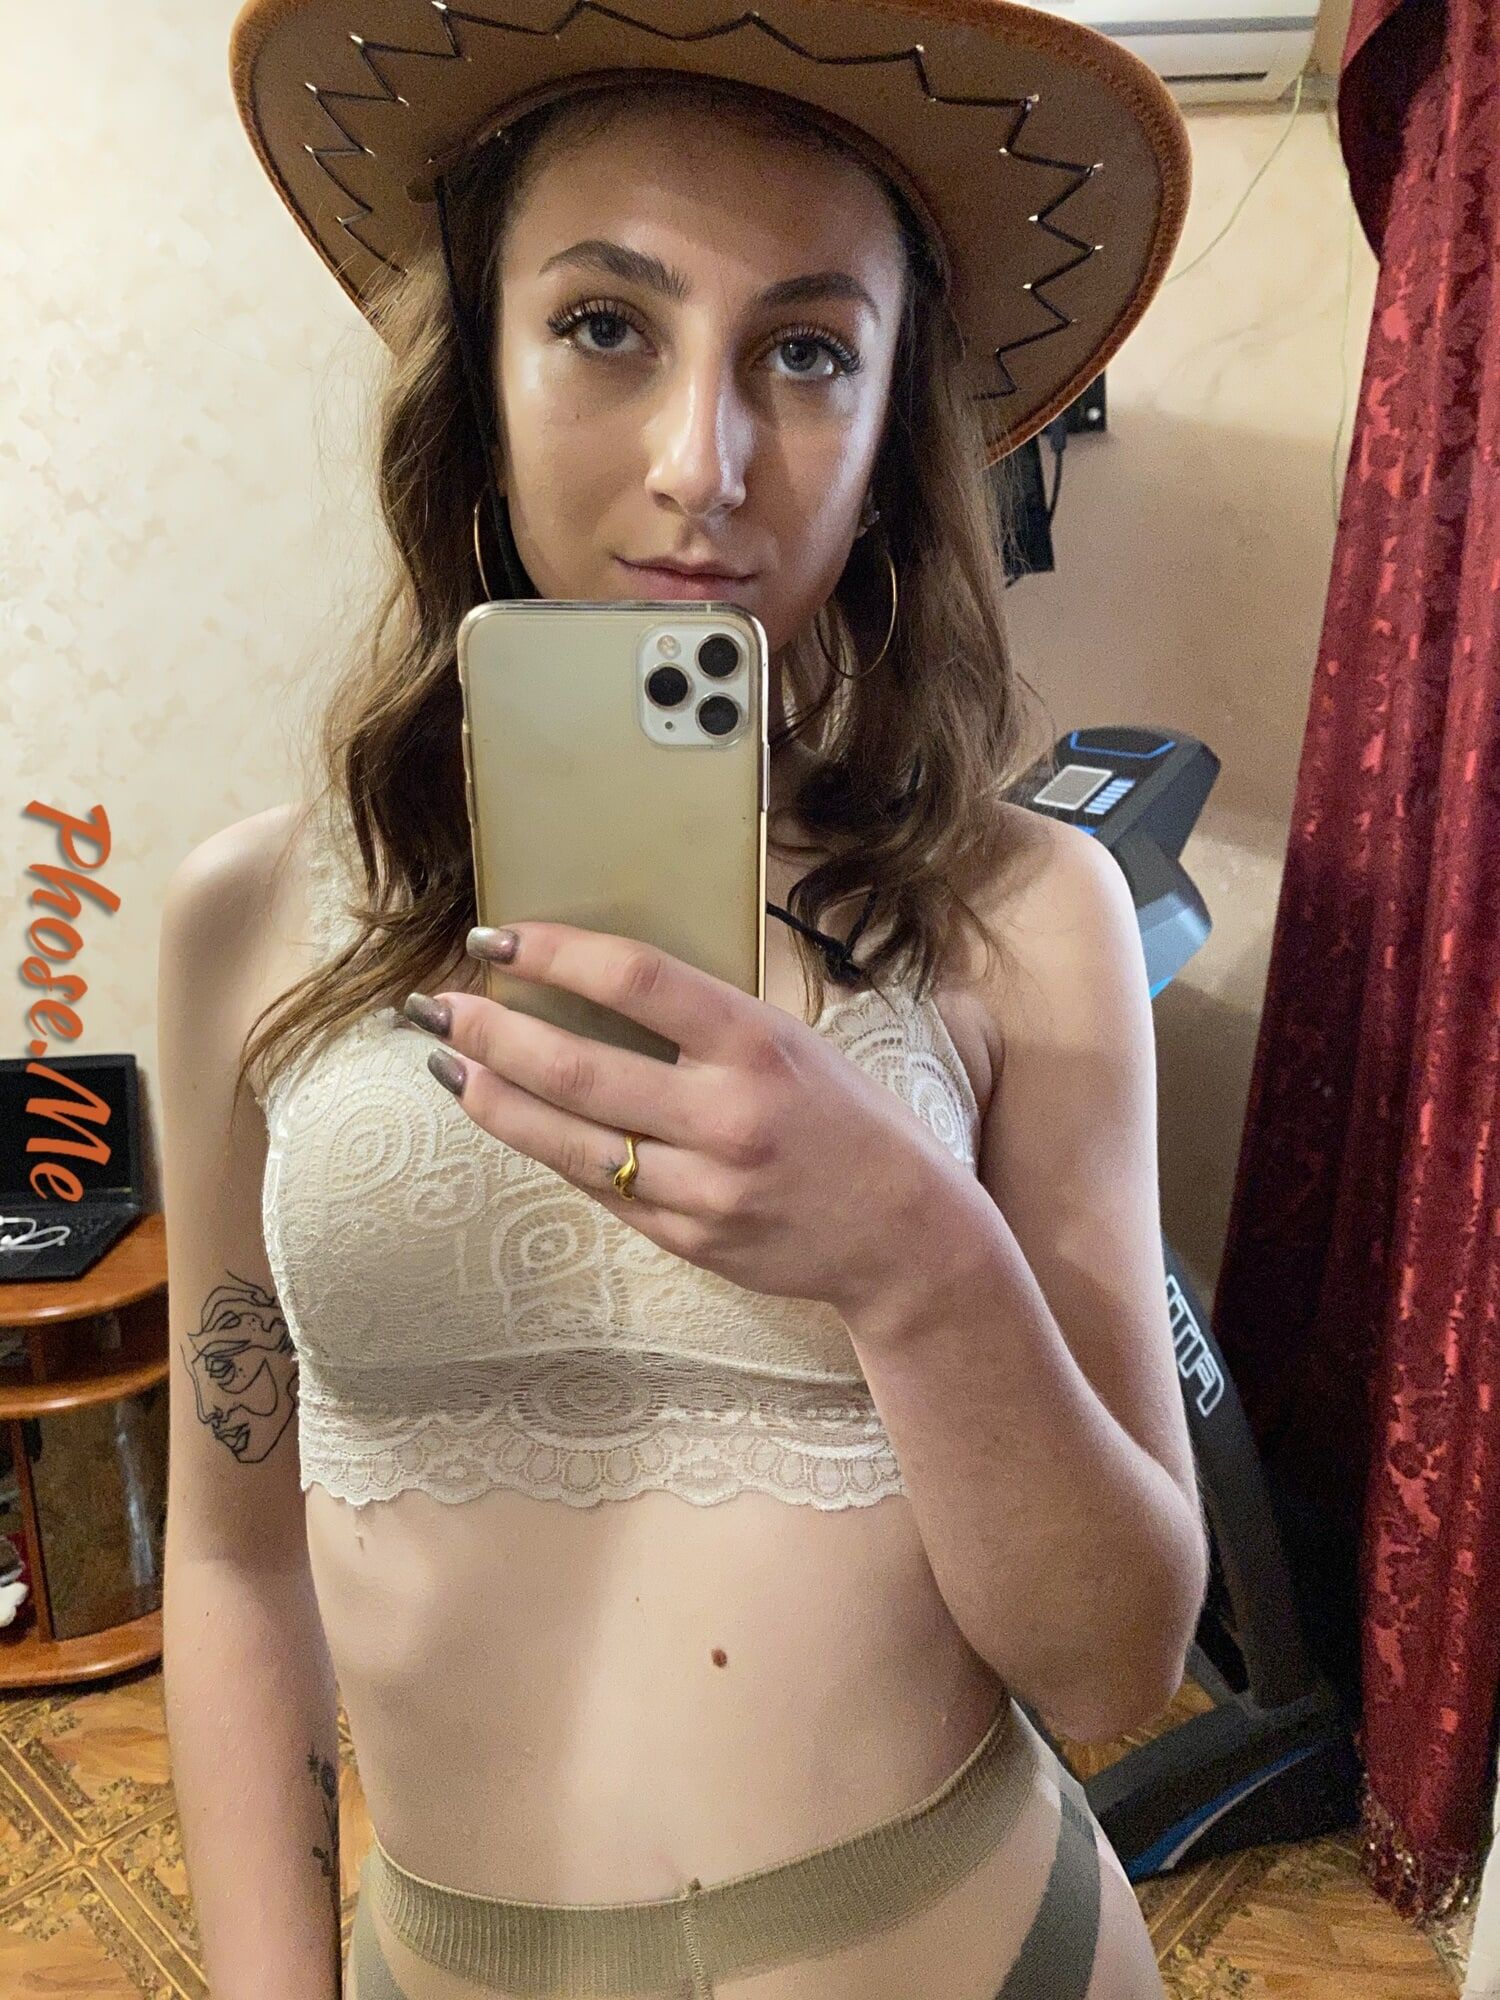 Sexy Selfies From A Cowgirl In Pantyhose #16